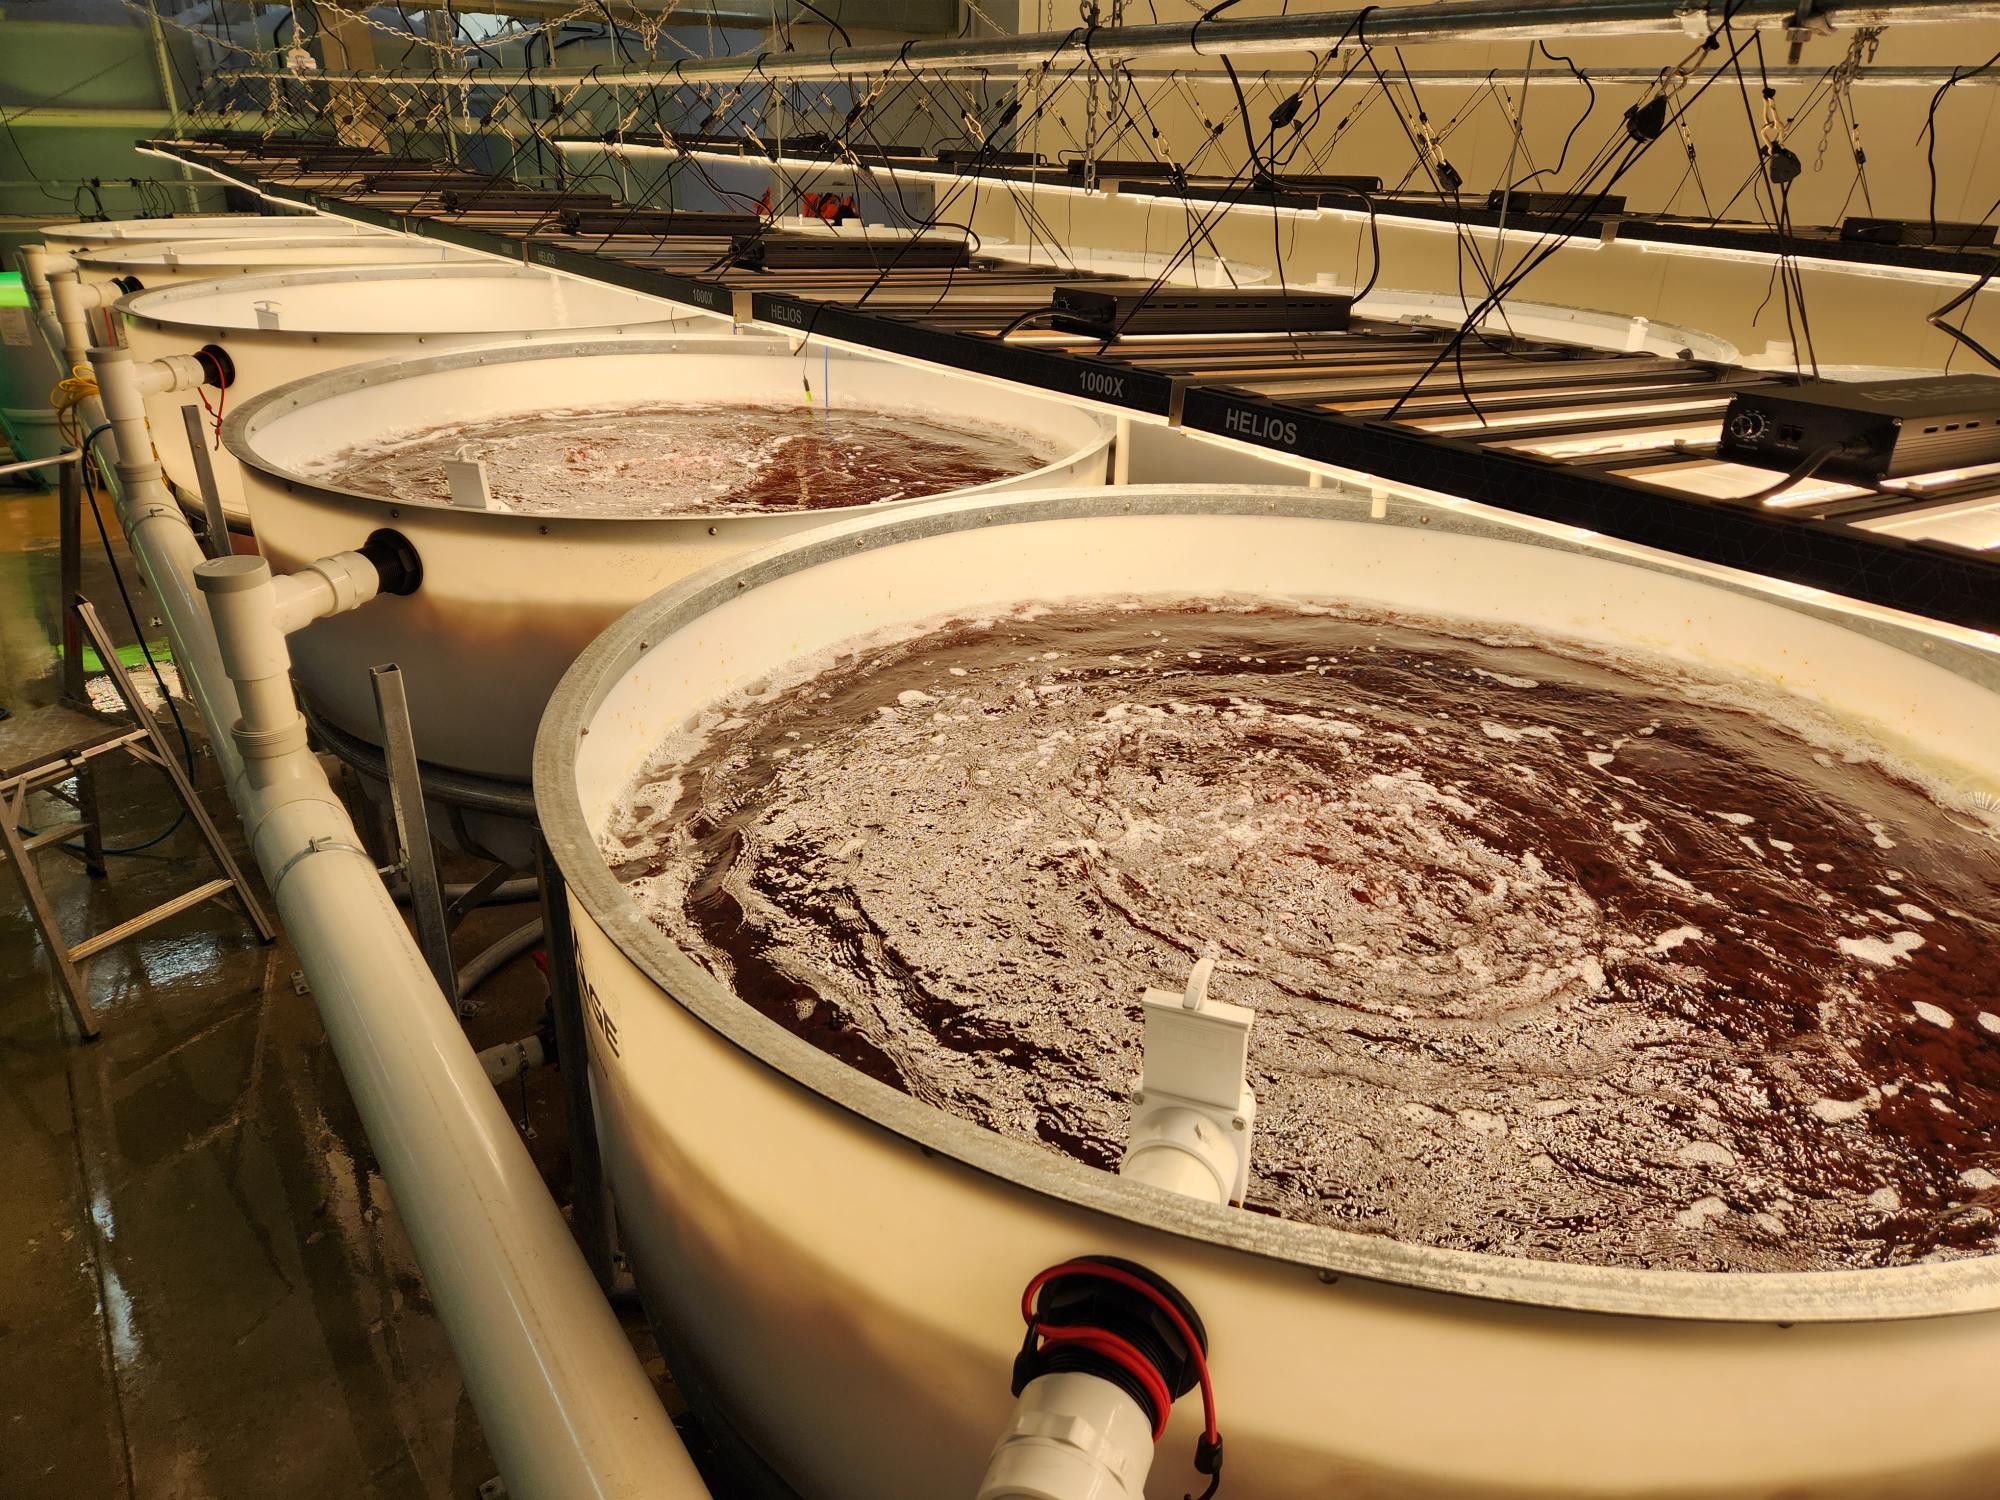 Asparagopsis seaweed being processed at scale in unique land-based aquaculture systems at CH4 facility.